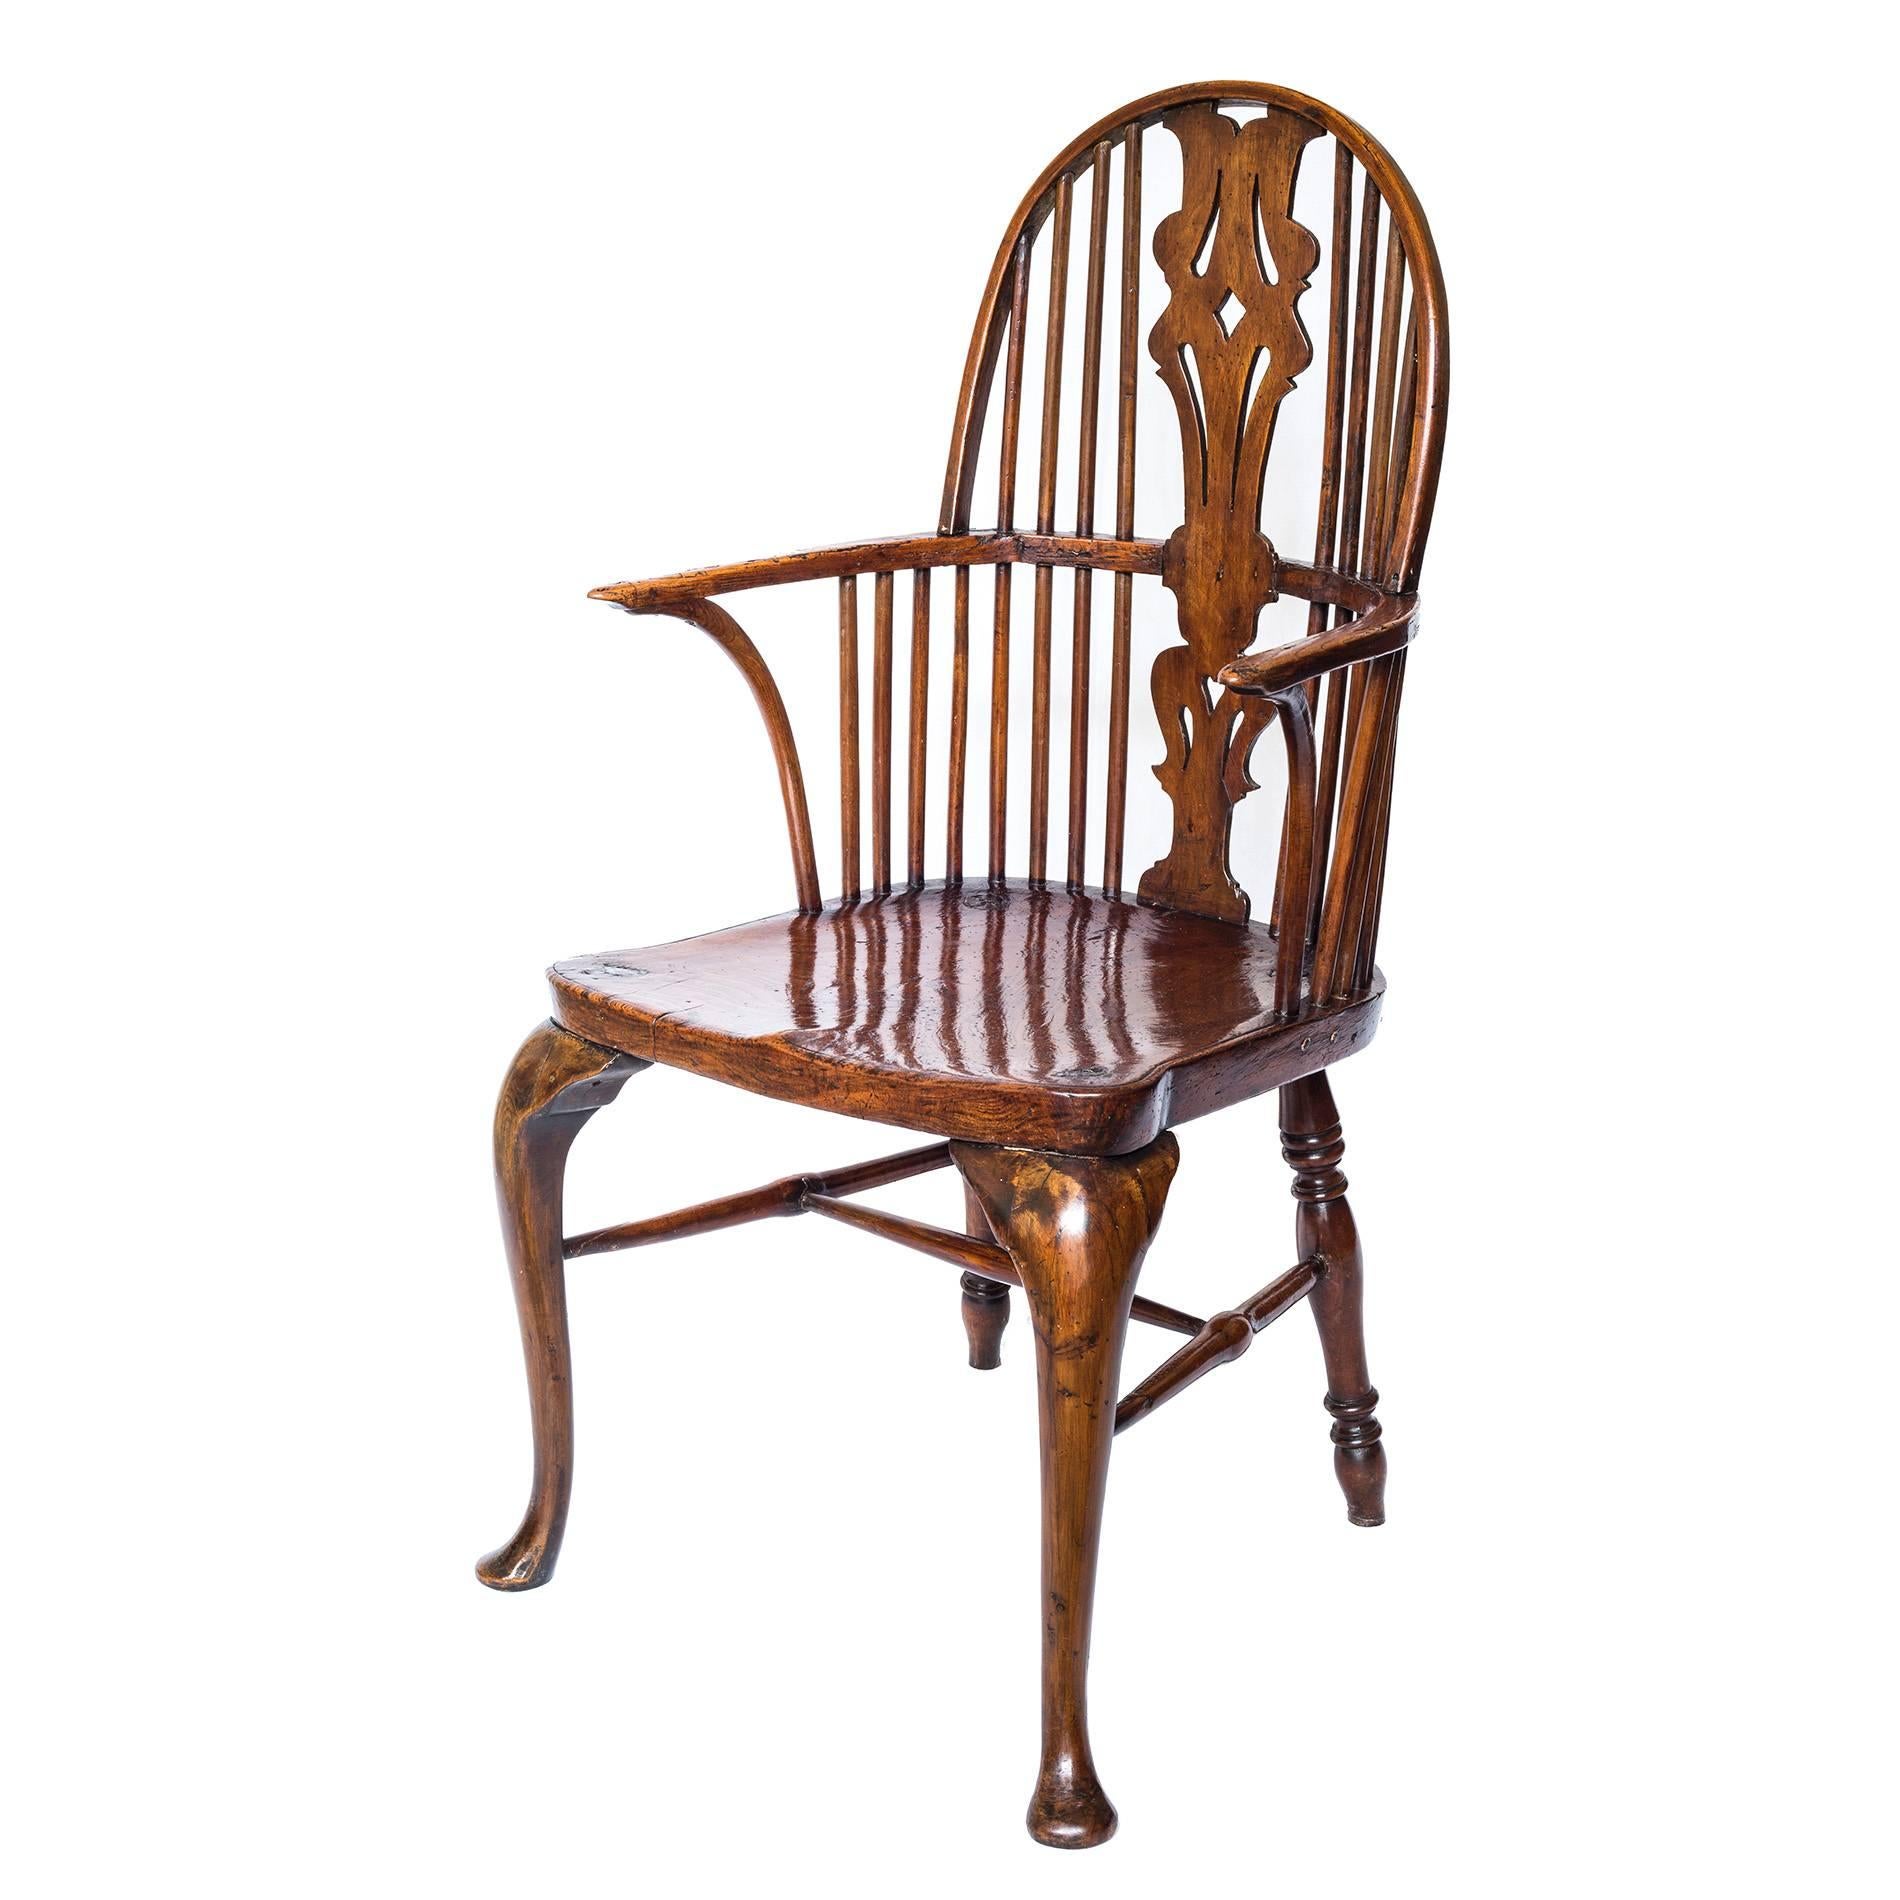 English George III Rustic High-Back Windsor Thames Valley Armchair, Elm, Ash and Walnut